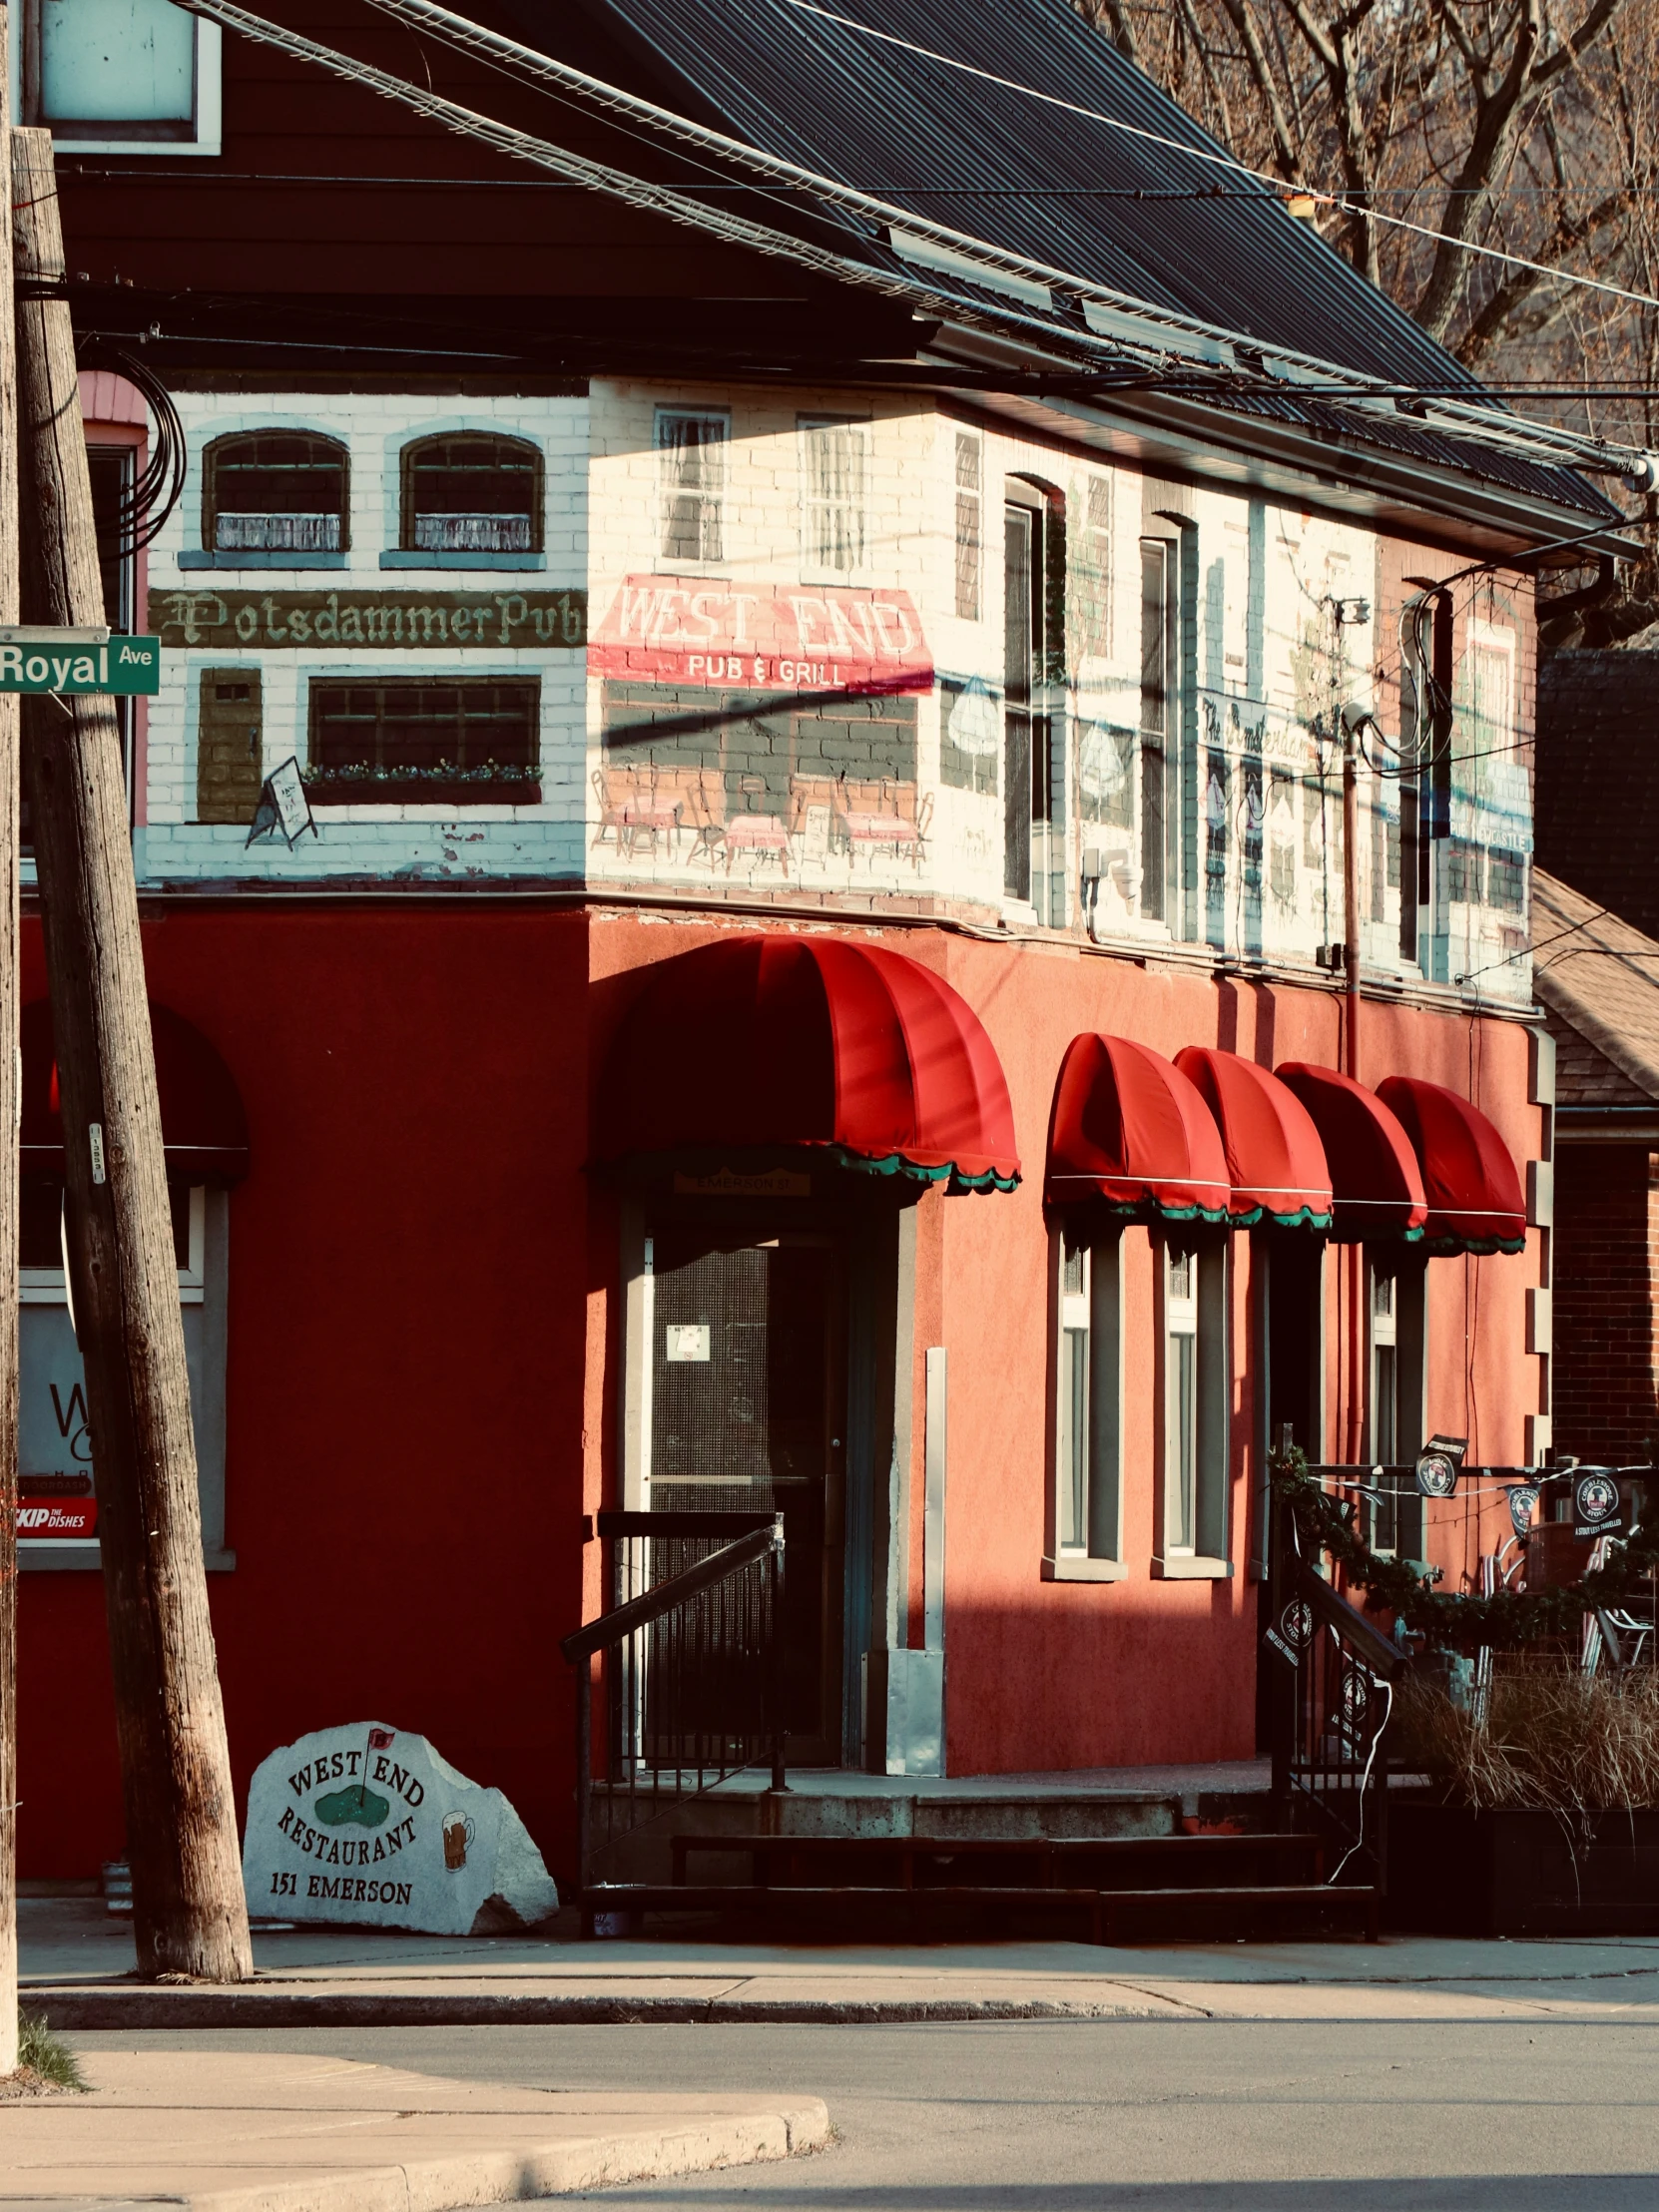 red and white business with awnings is situated on a street corner